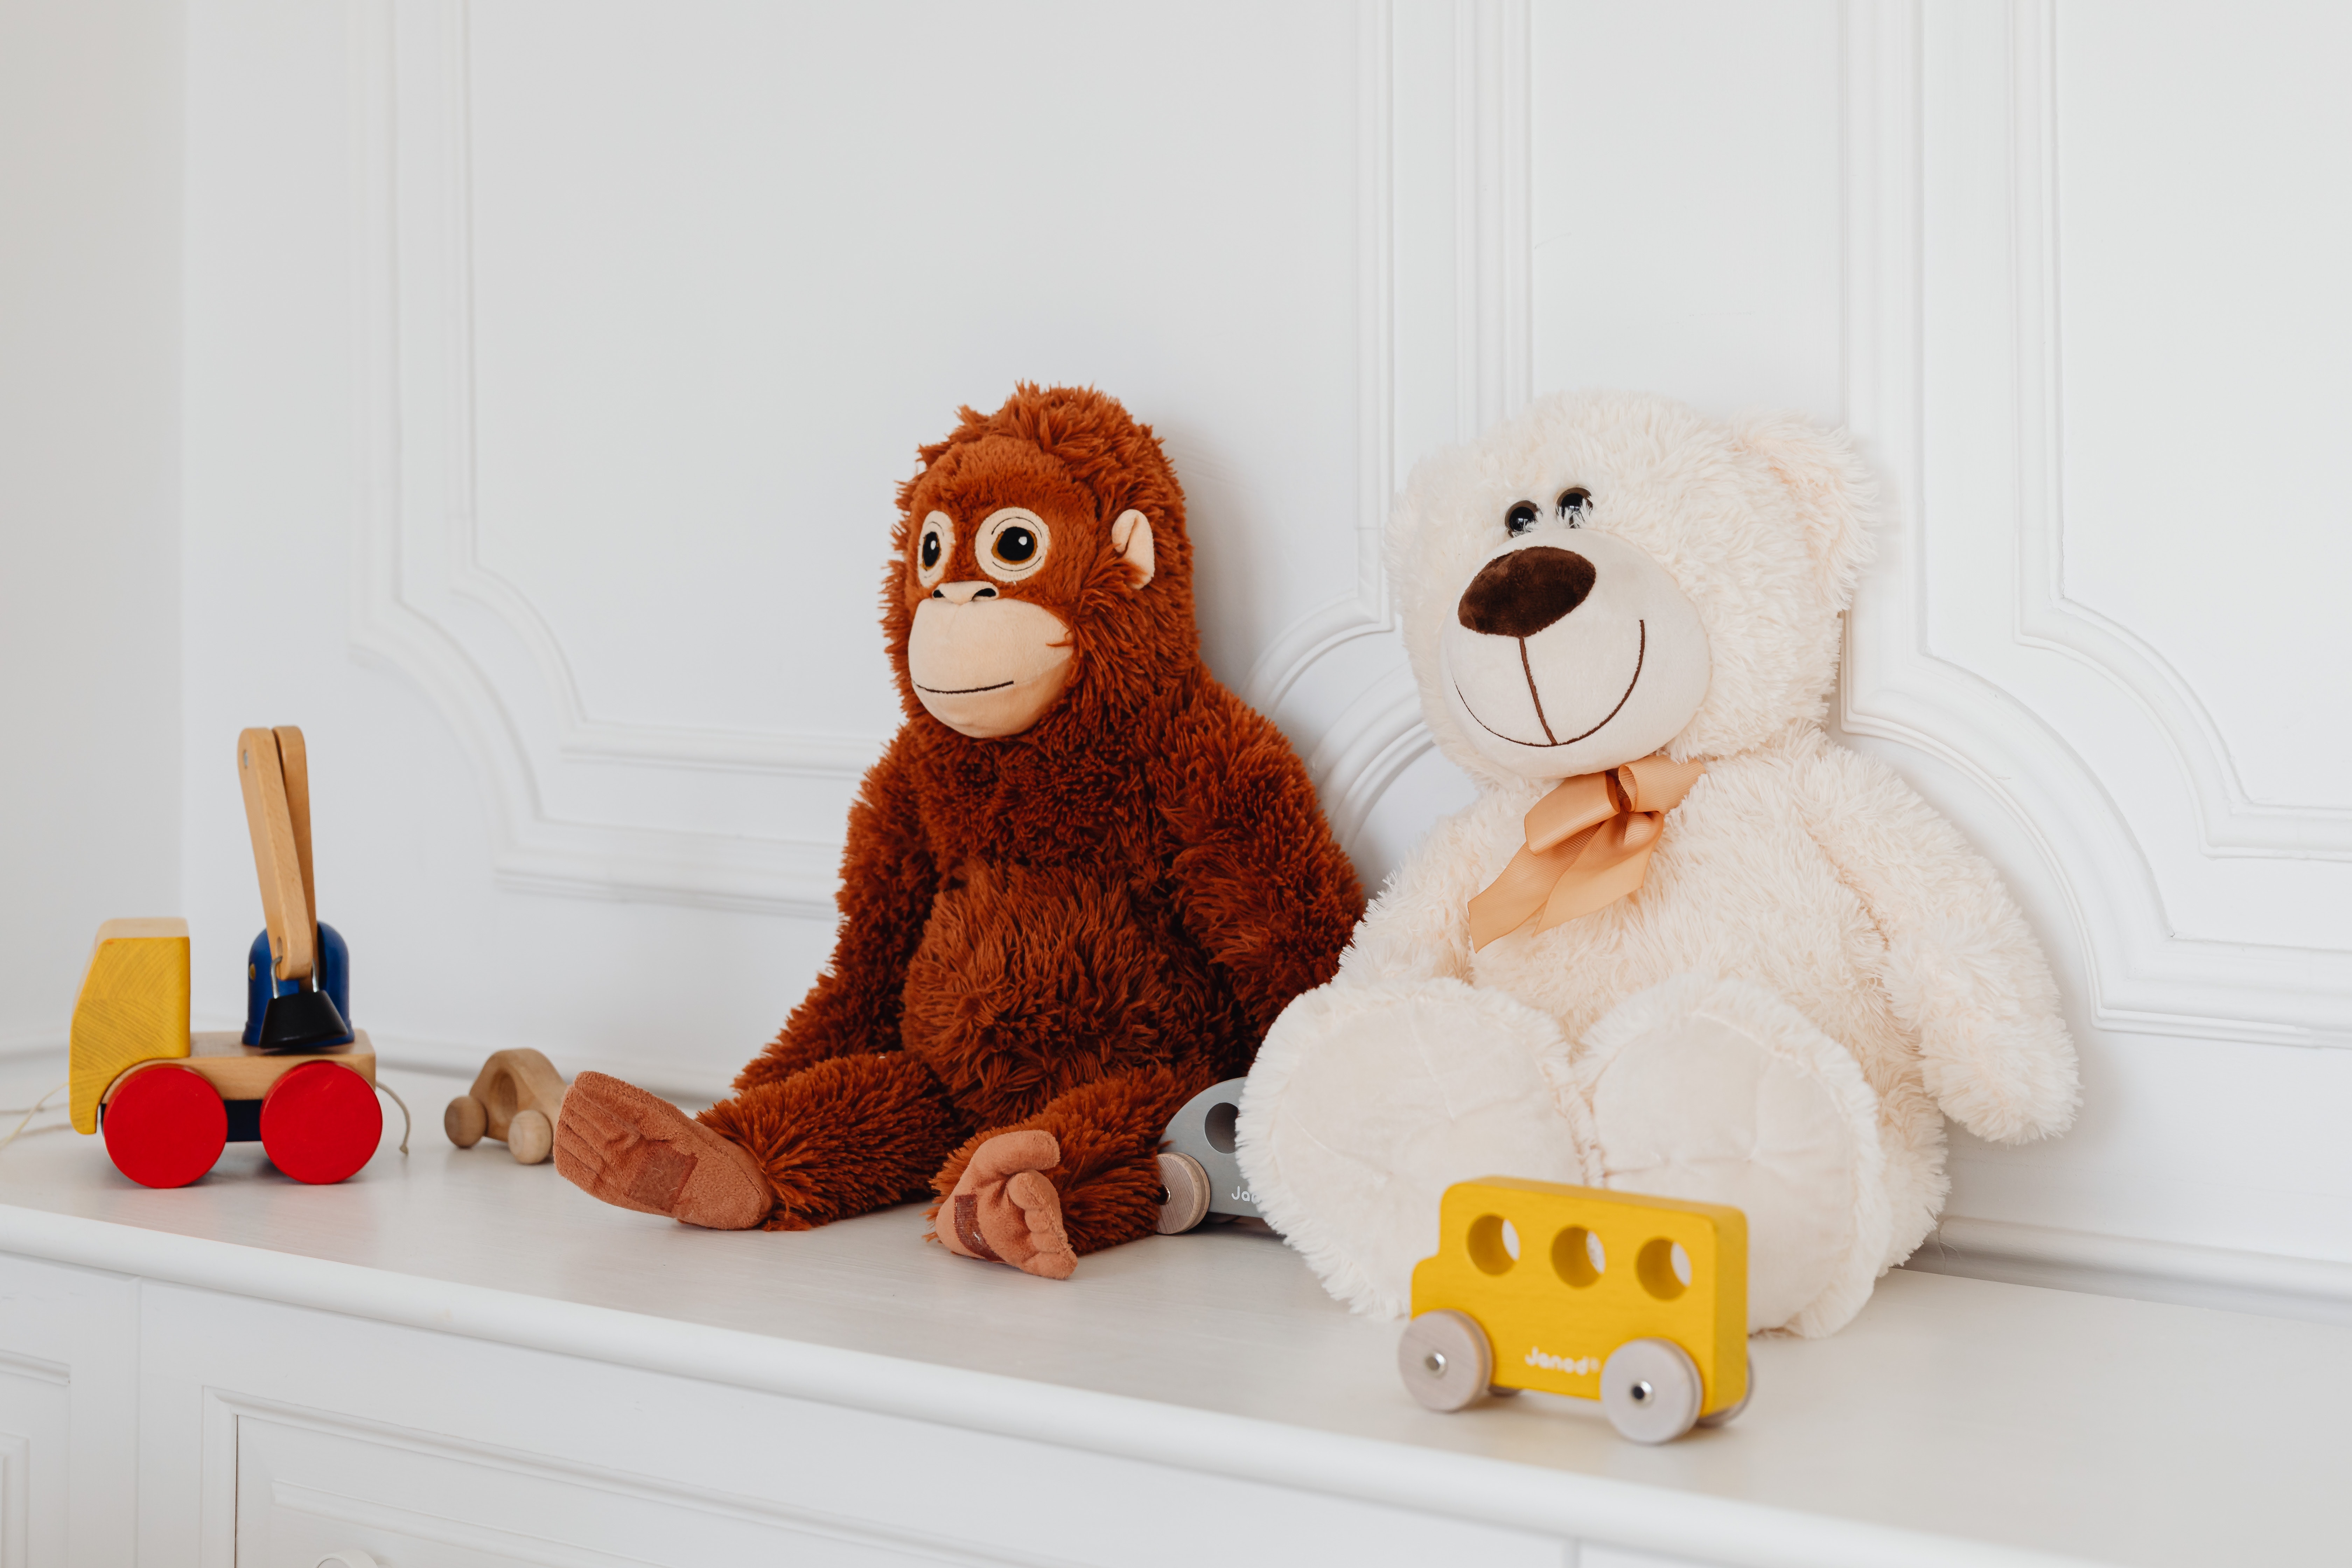 Cleaning tips|cleaning methods for plush toys, babies will no longer play with bacteria!